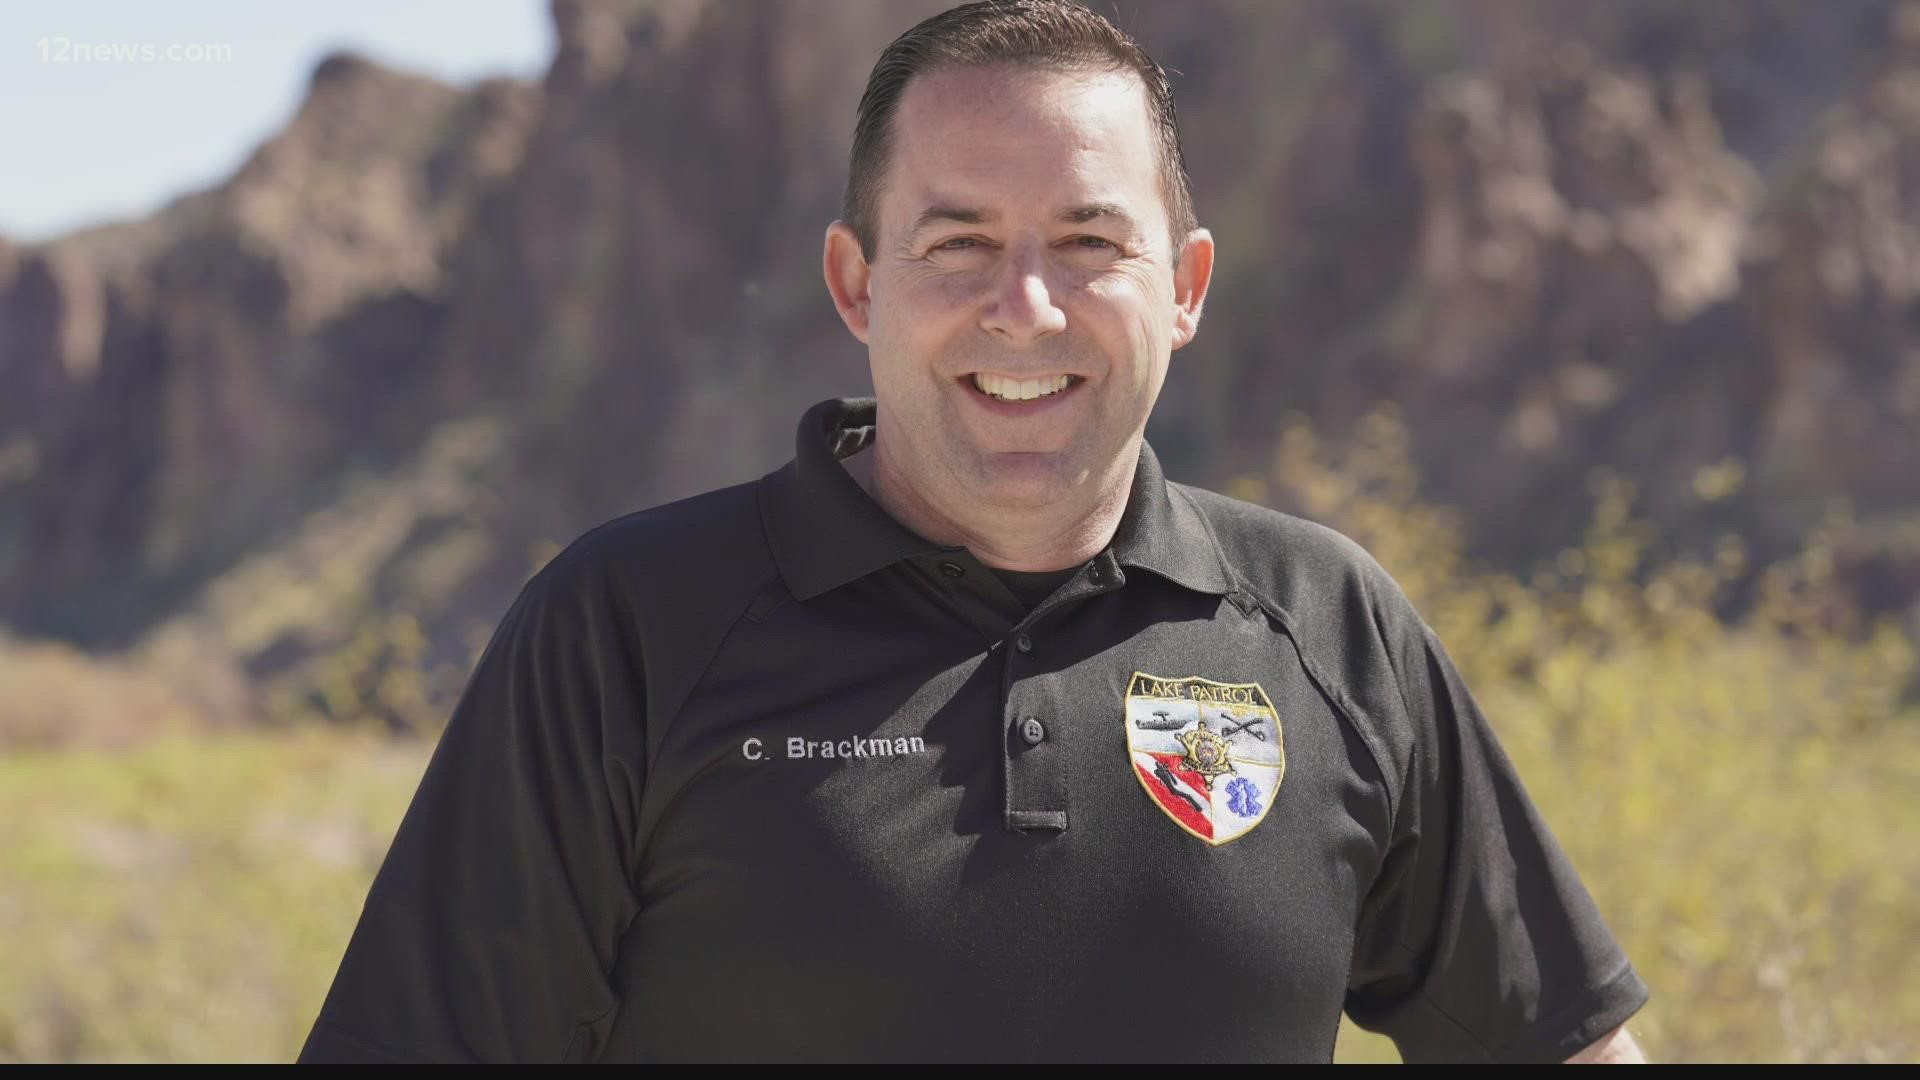 Lt. Chad Brackman was hit by a driver in a construction zone in Scottsdale last week. His colleagues remembered him as a friend and for having a dry sense of humor.